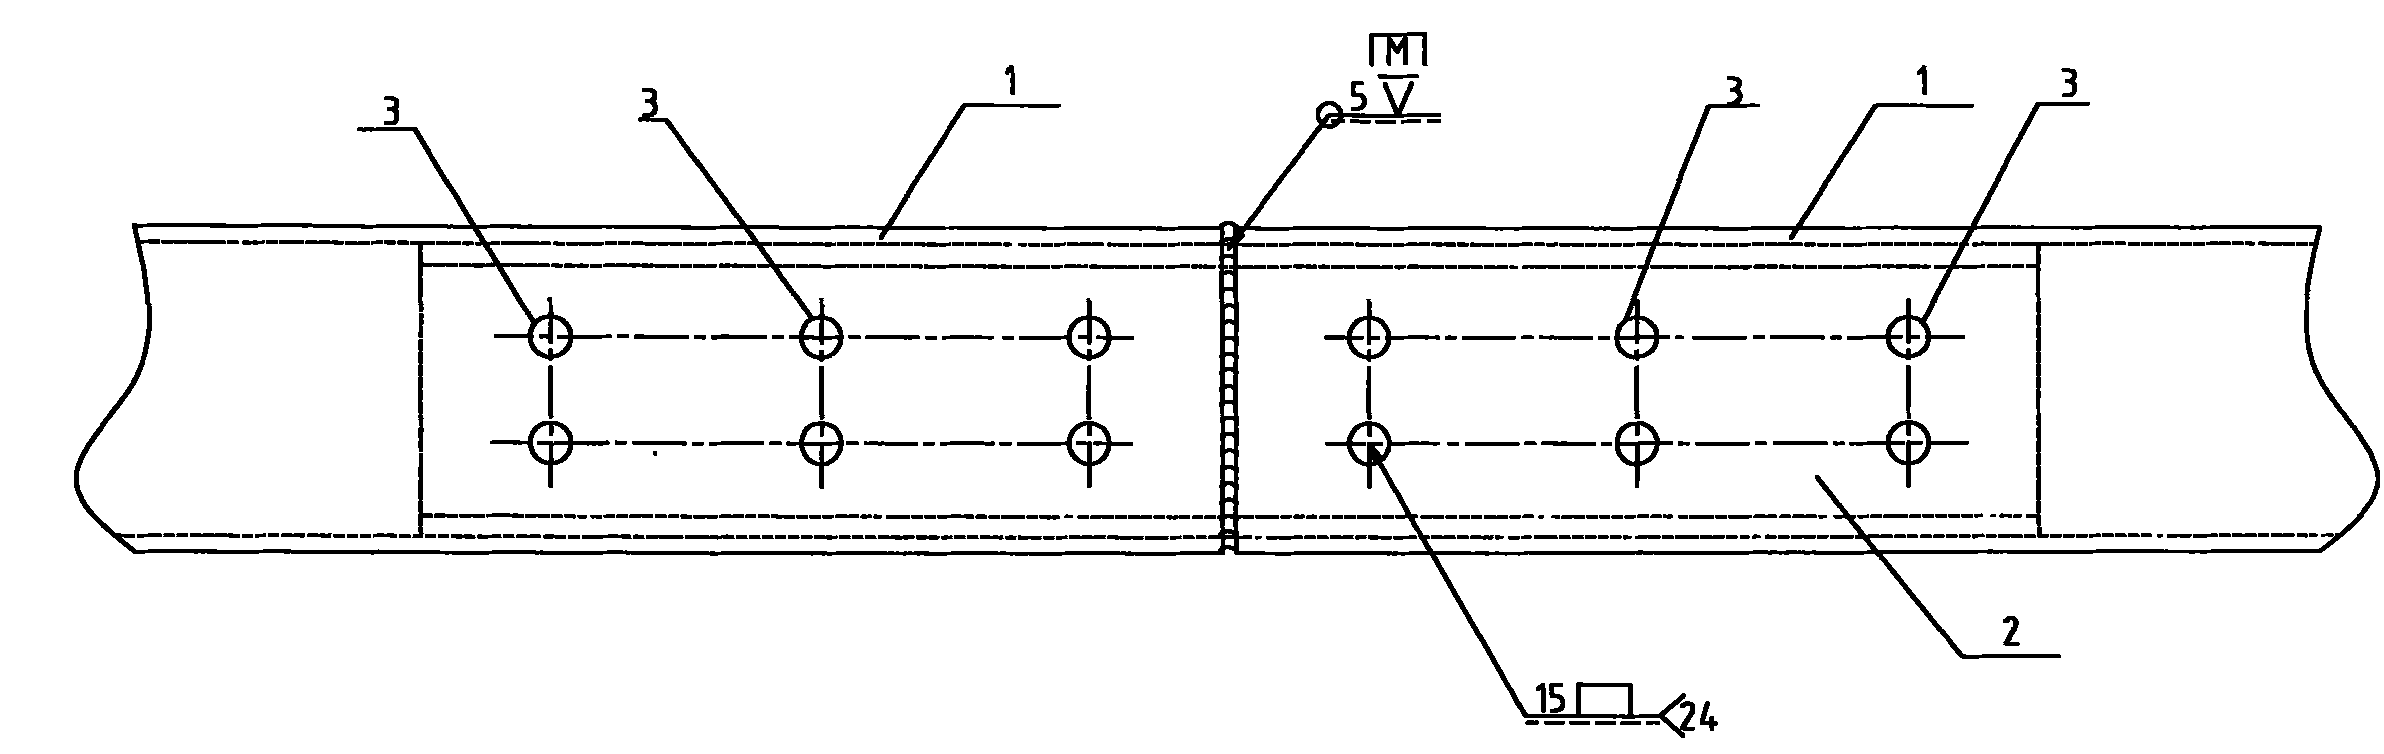 Main girder square steel splicing structure on escalator or moving pavement